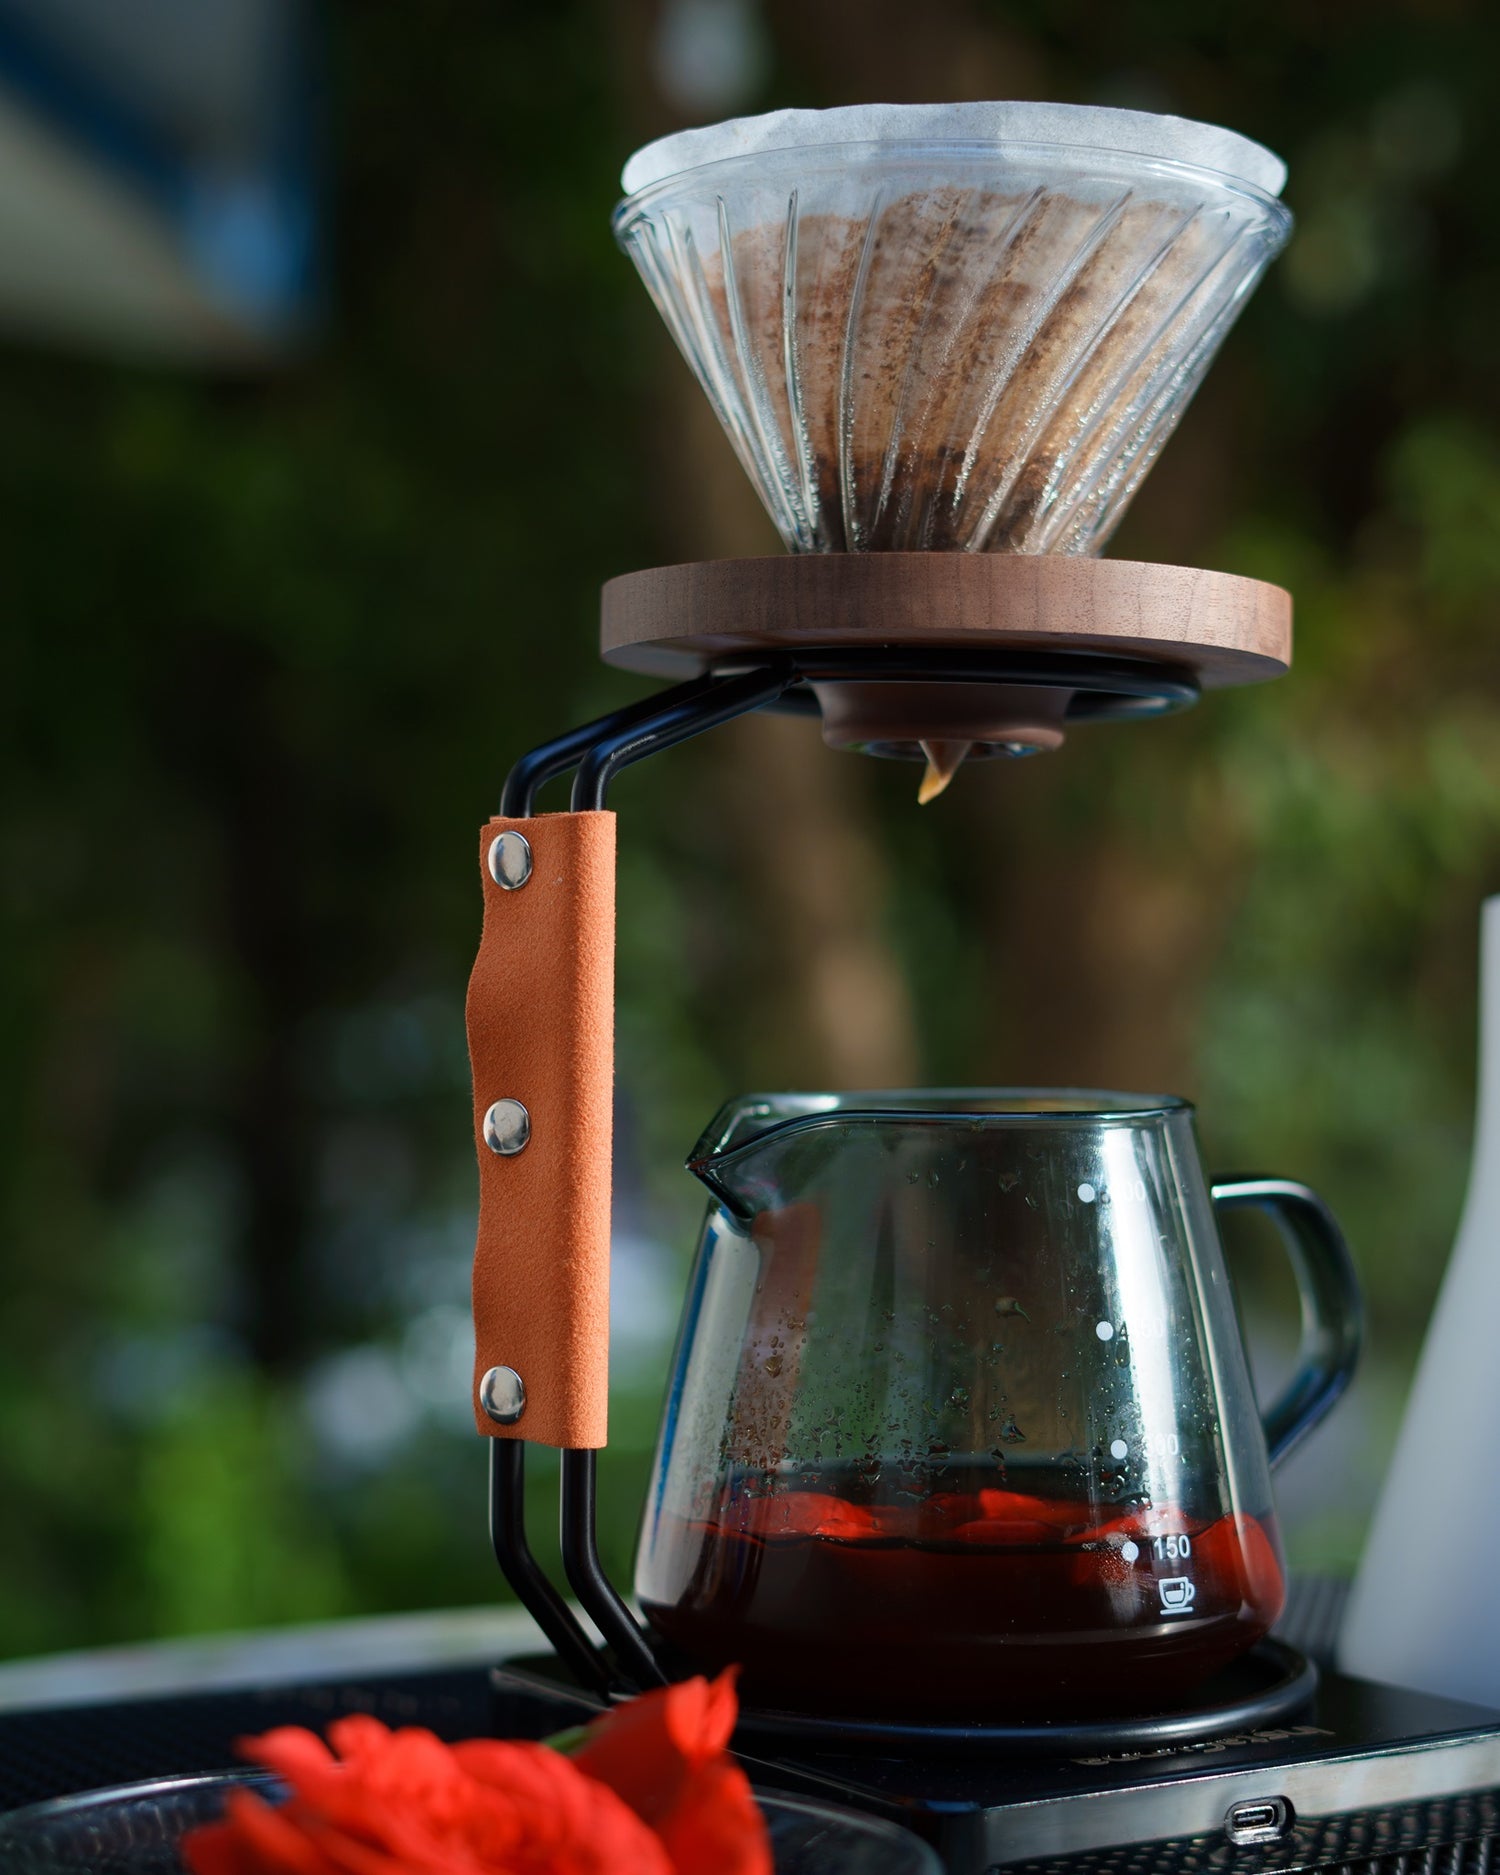 Elevate Your Coffee Journey: "Brew Your Own Cup 2.0" Workshop at Siolim Specialty Coffee Roasters